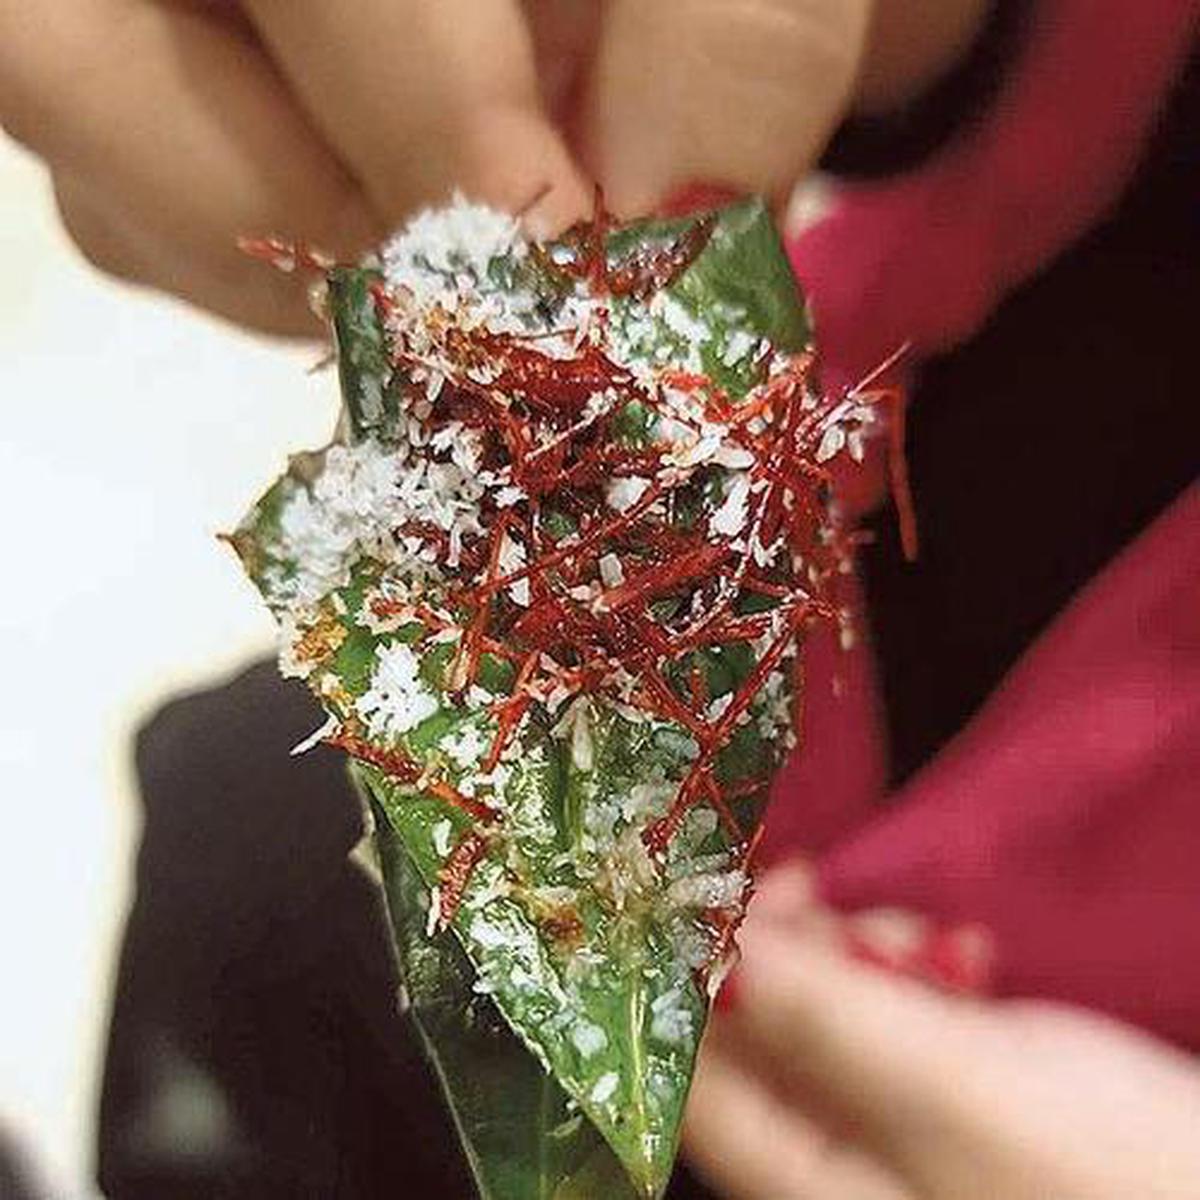 Meetha paan which people love to eat after their meals.